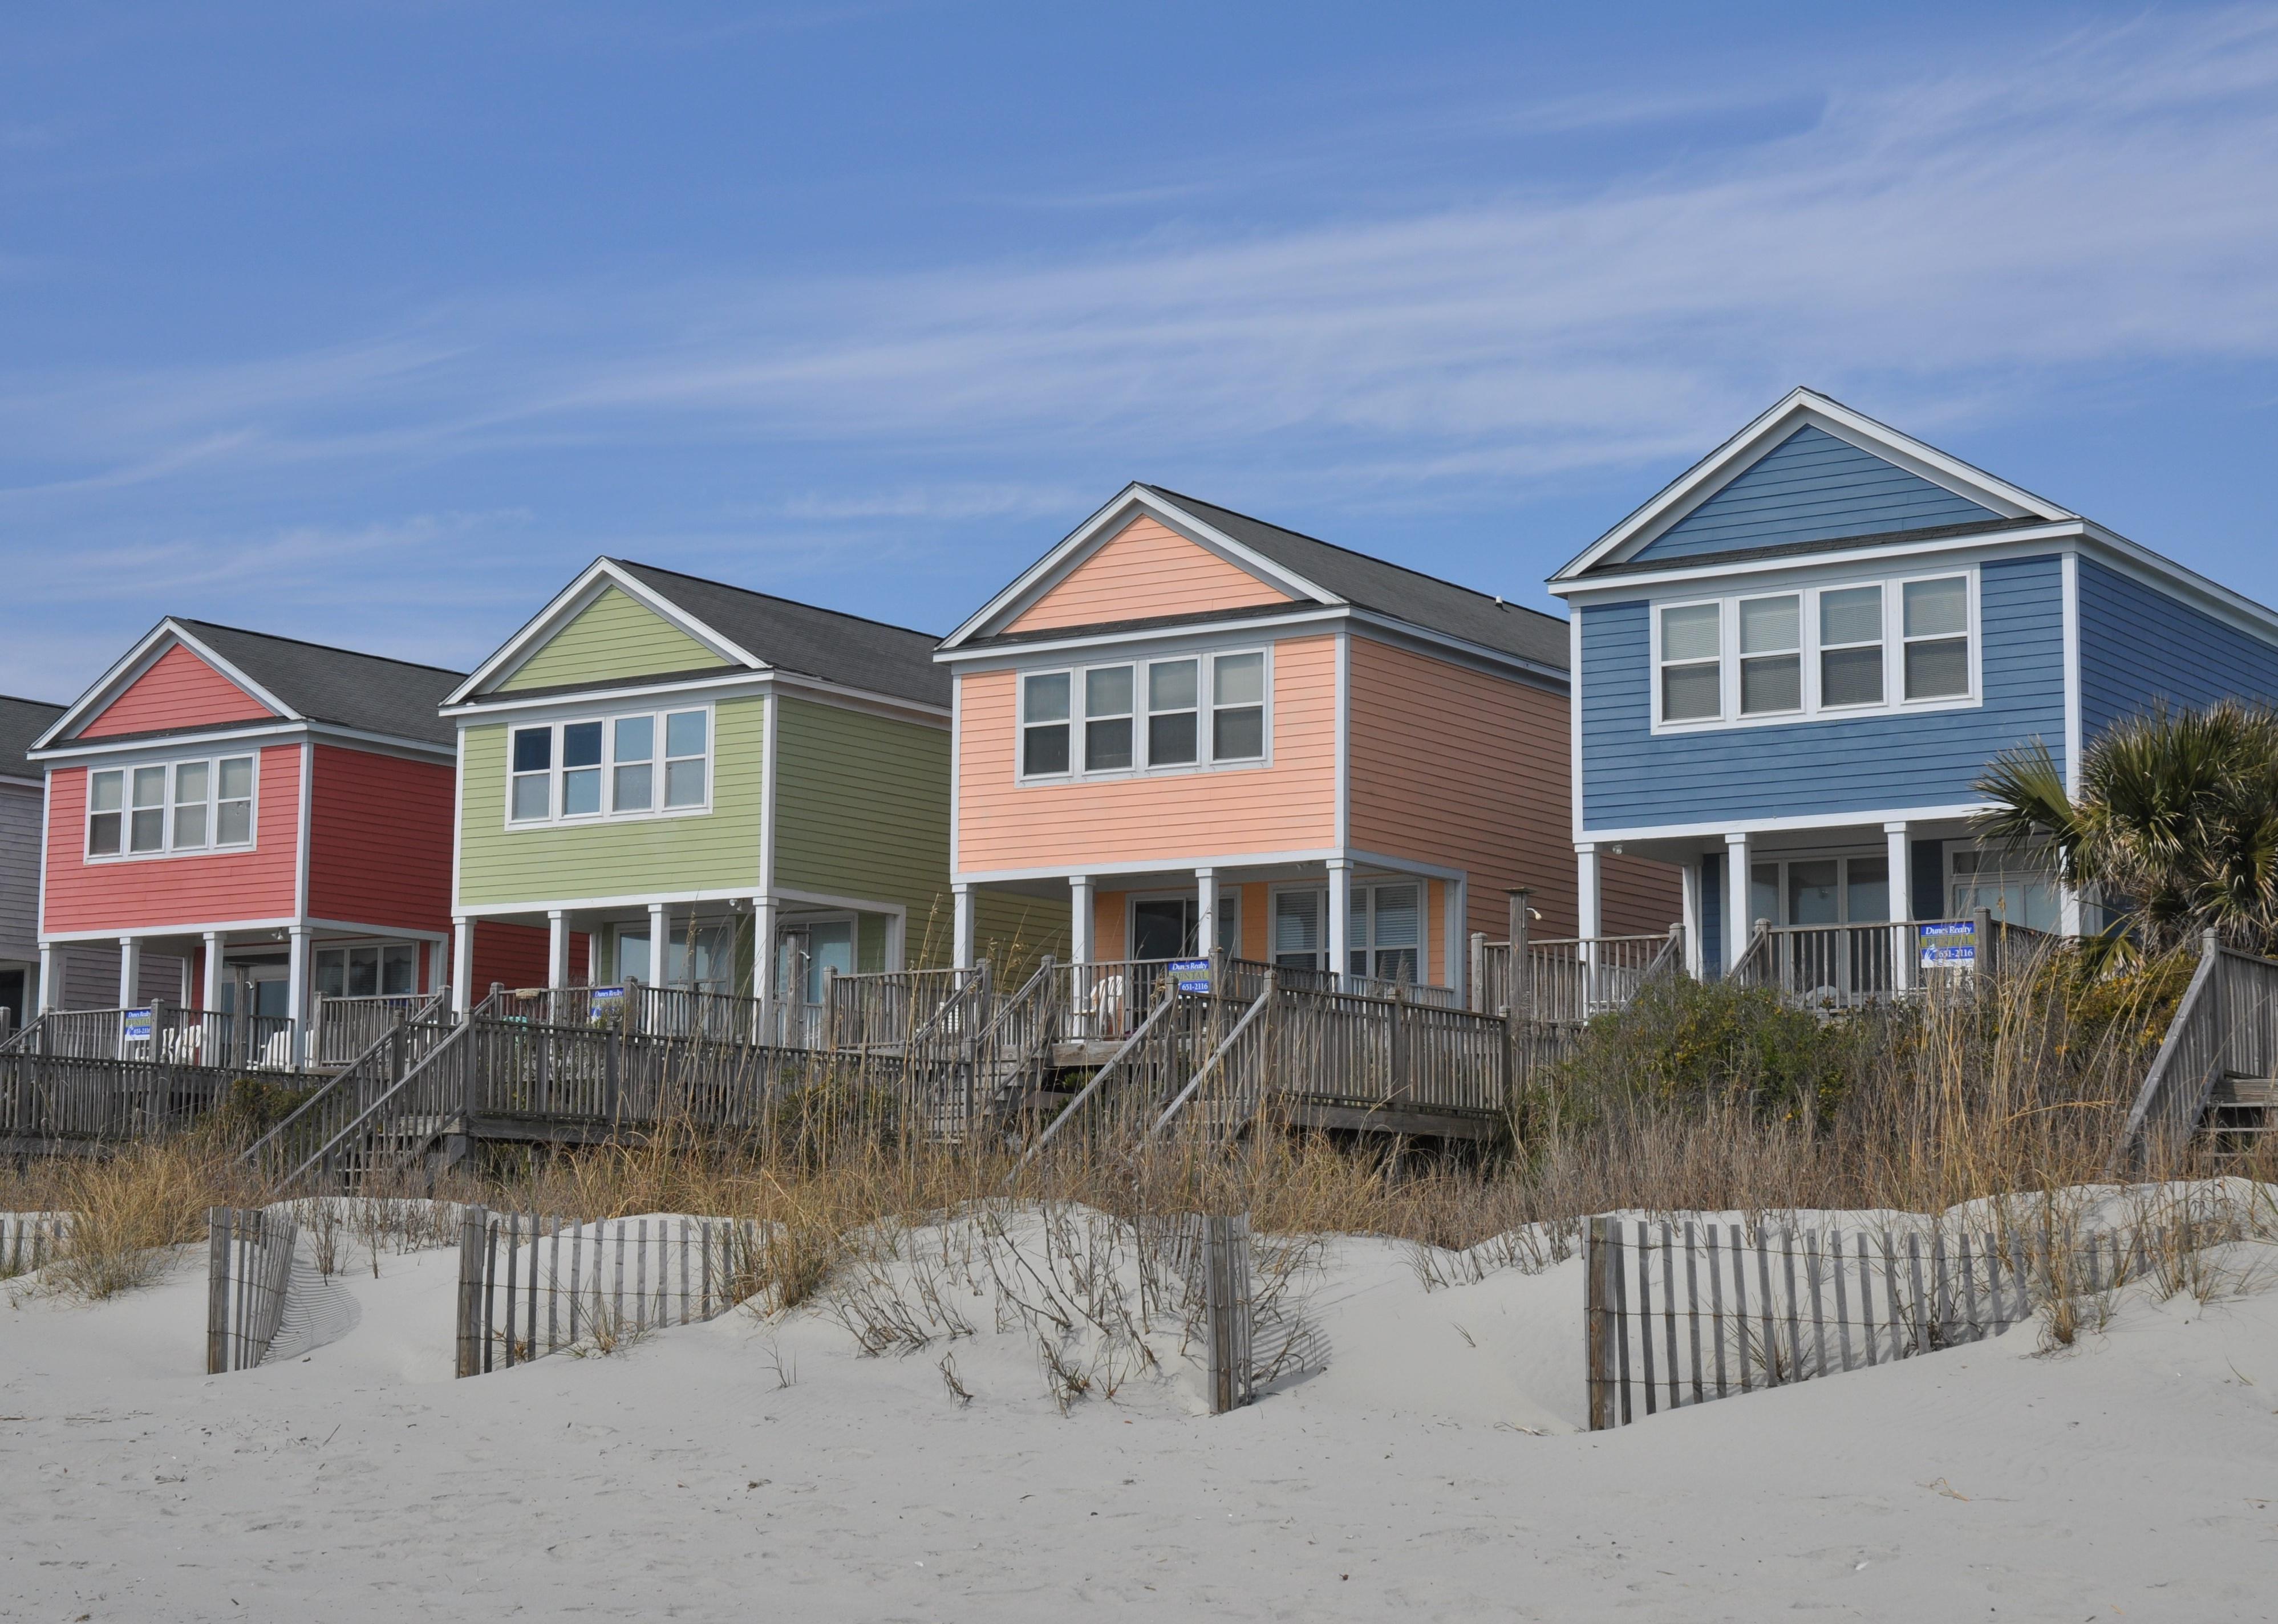 An image of four colorful beach homes in red, green, pink and blue with white windows